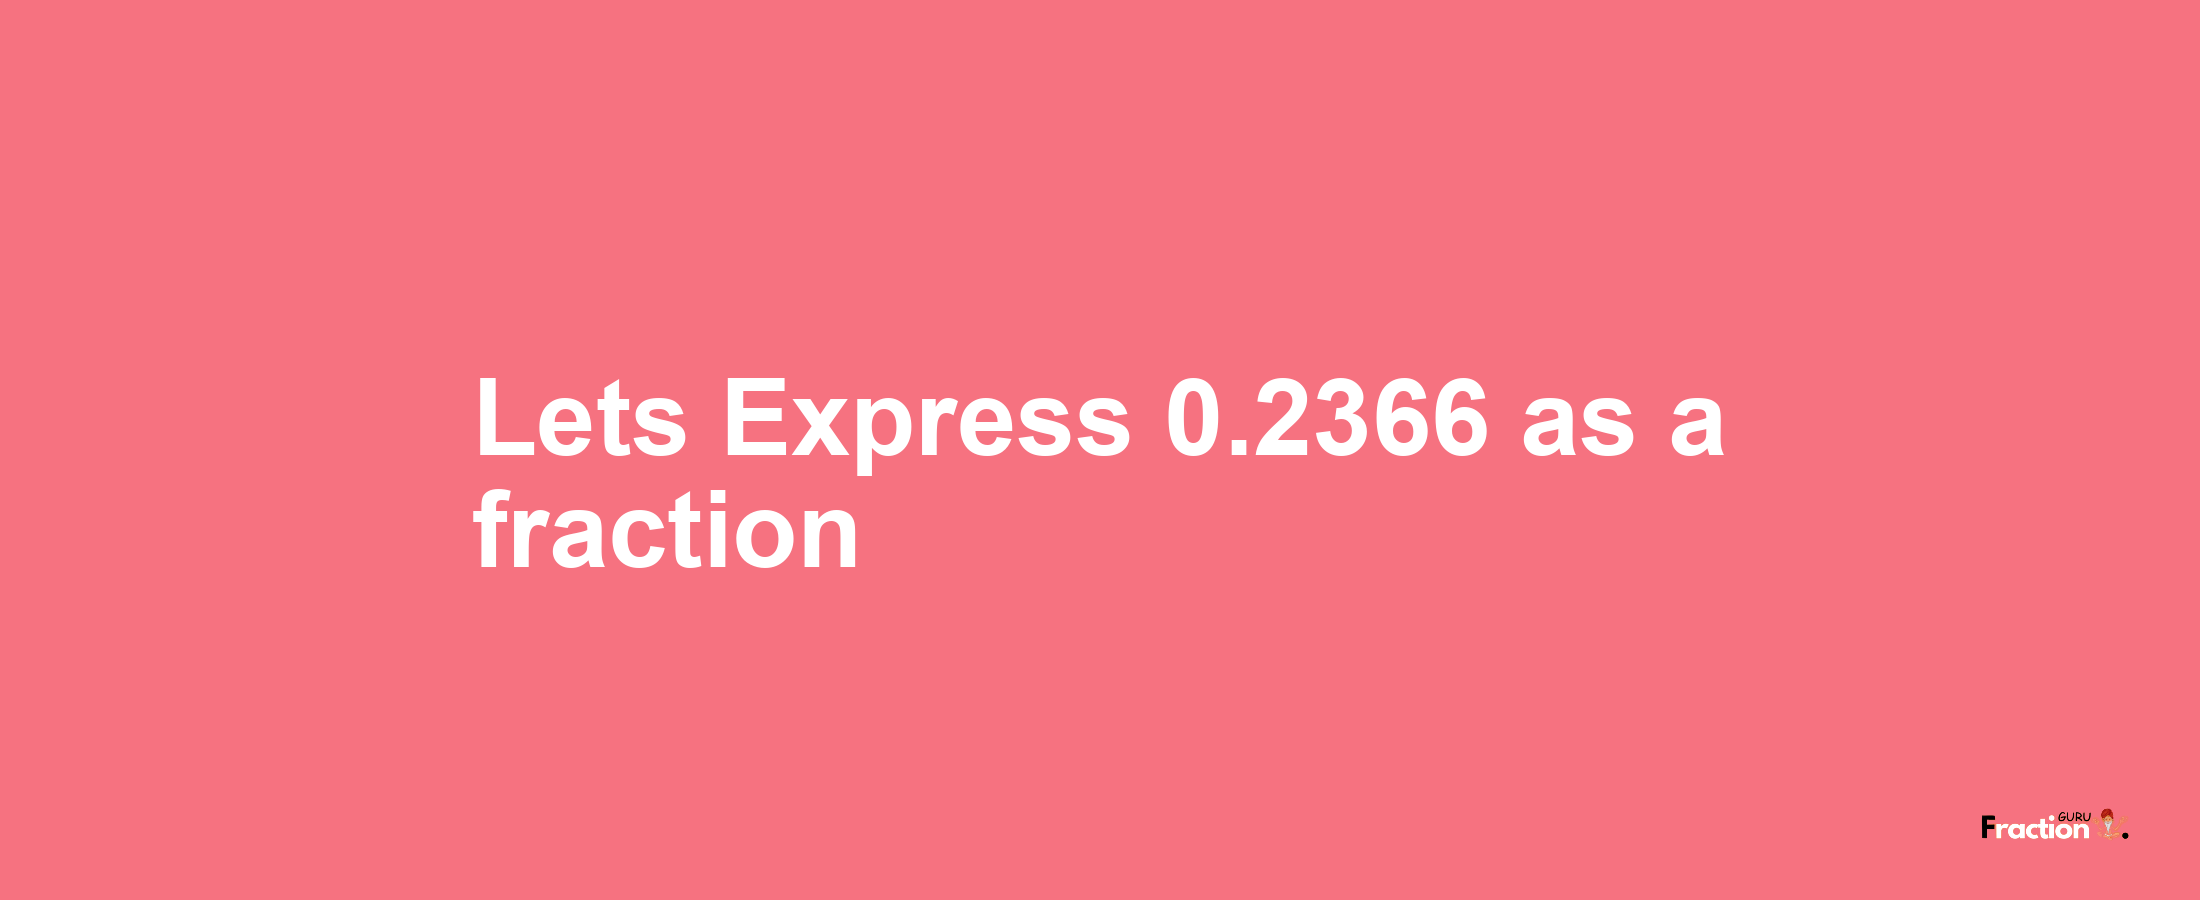 Lets Express 0.2366 as afraction